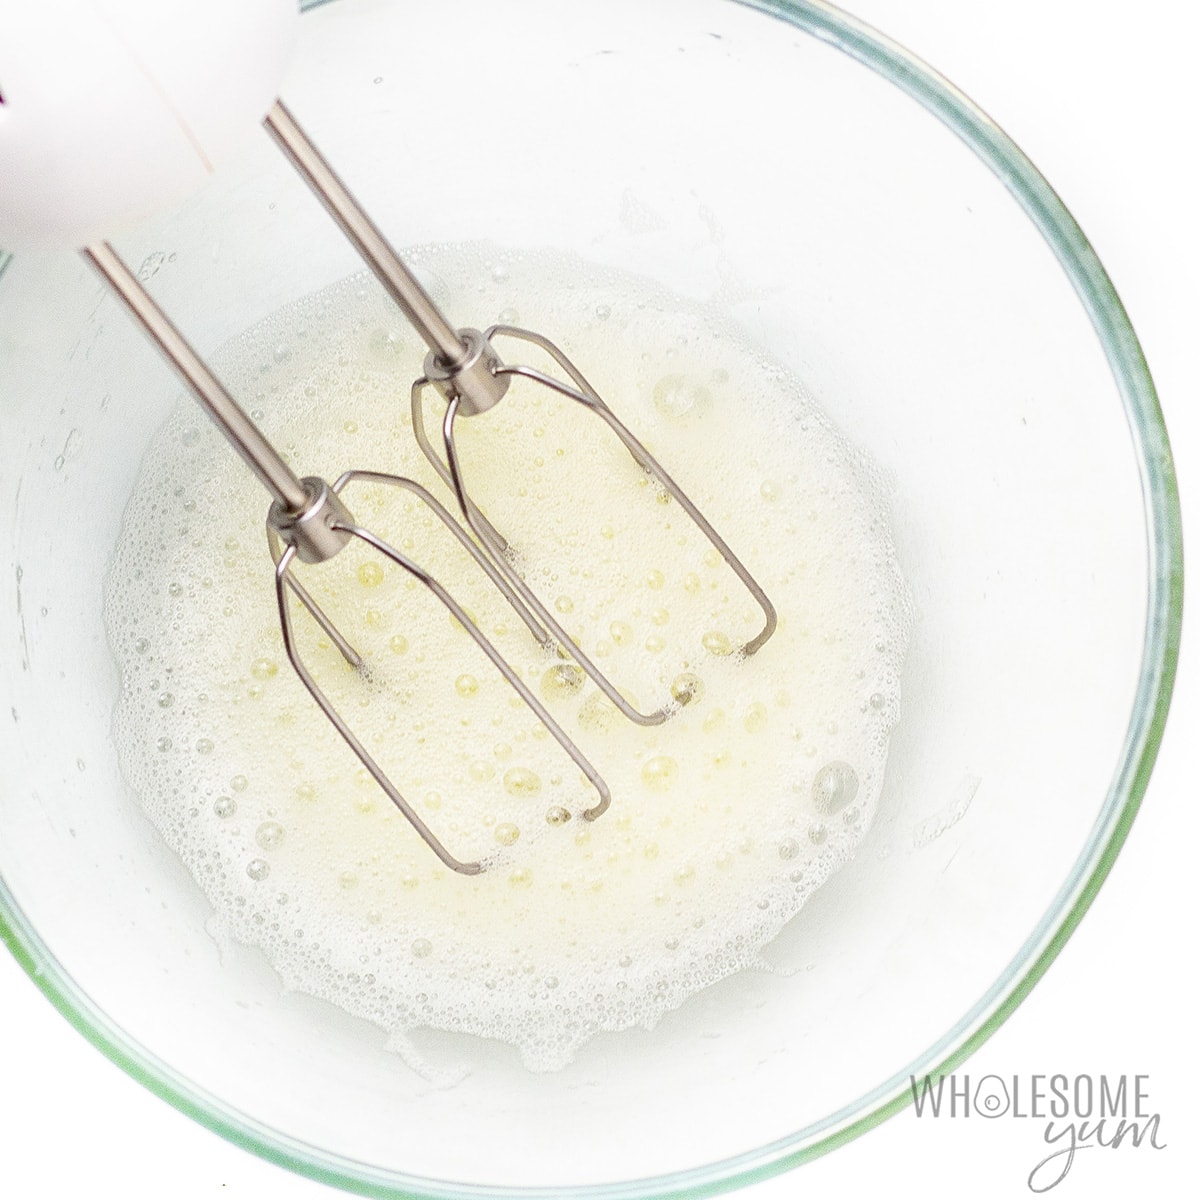 Whisk egg whites in a bowl until foamy.